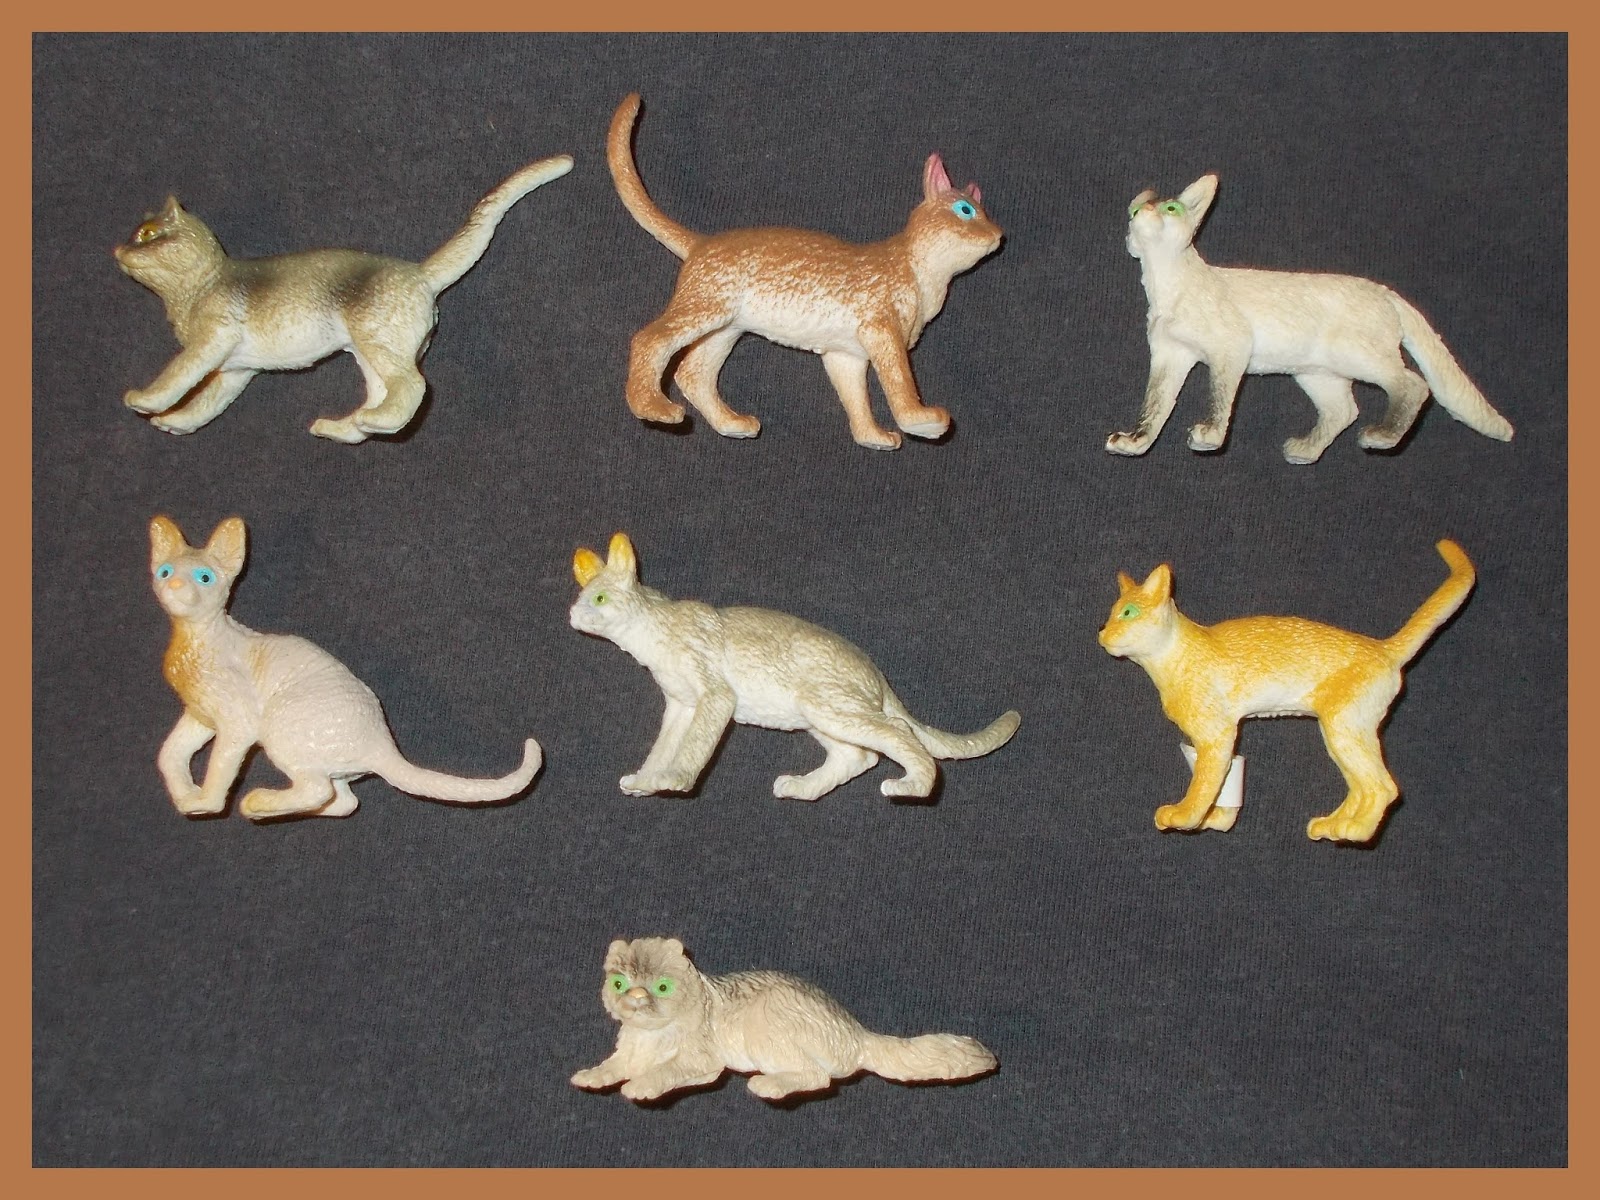 Small Scale World: C is for Cats, Chats, Mats